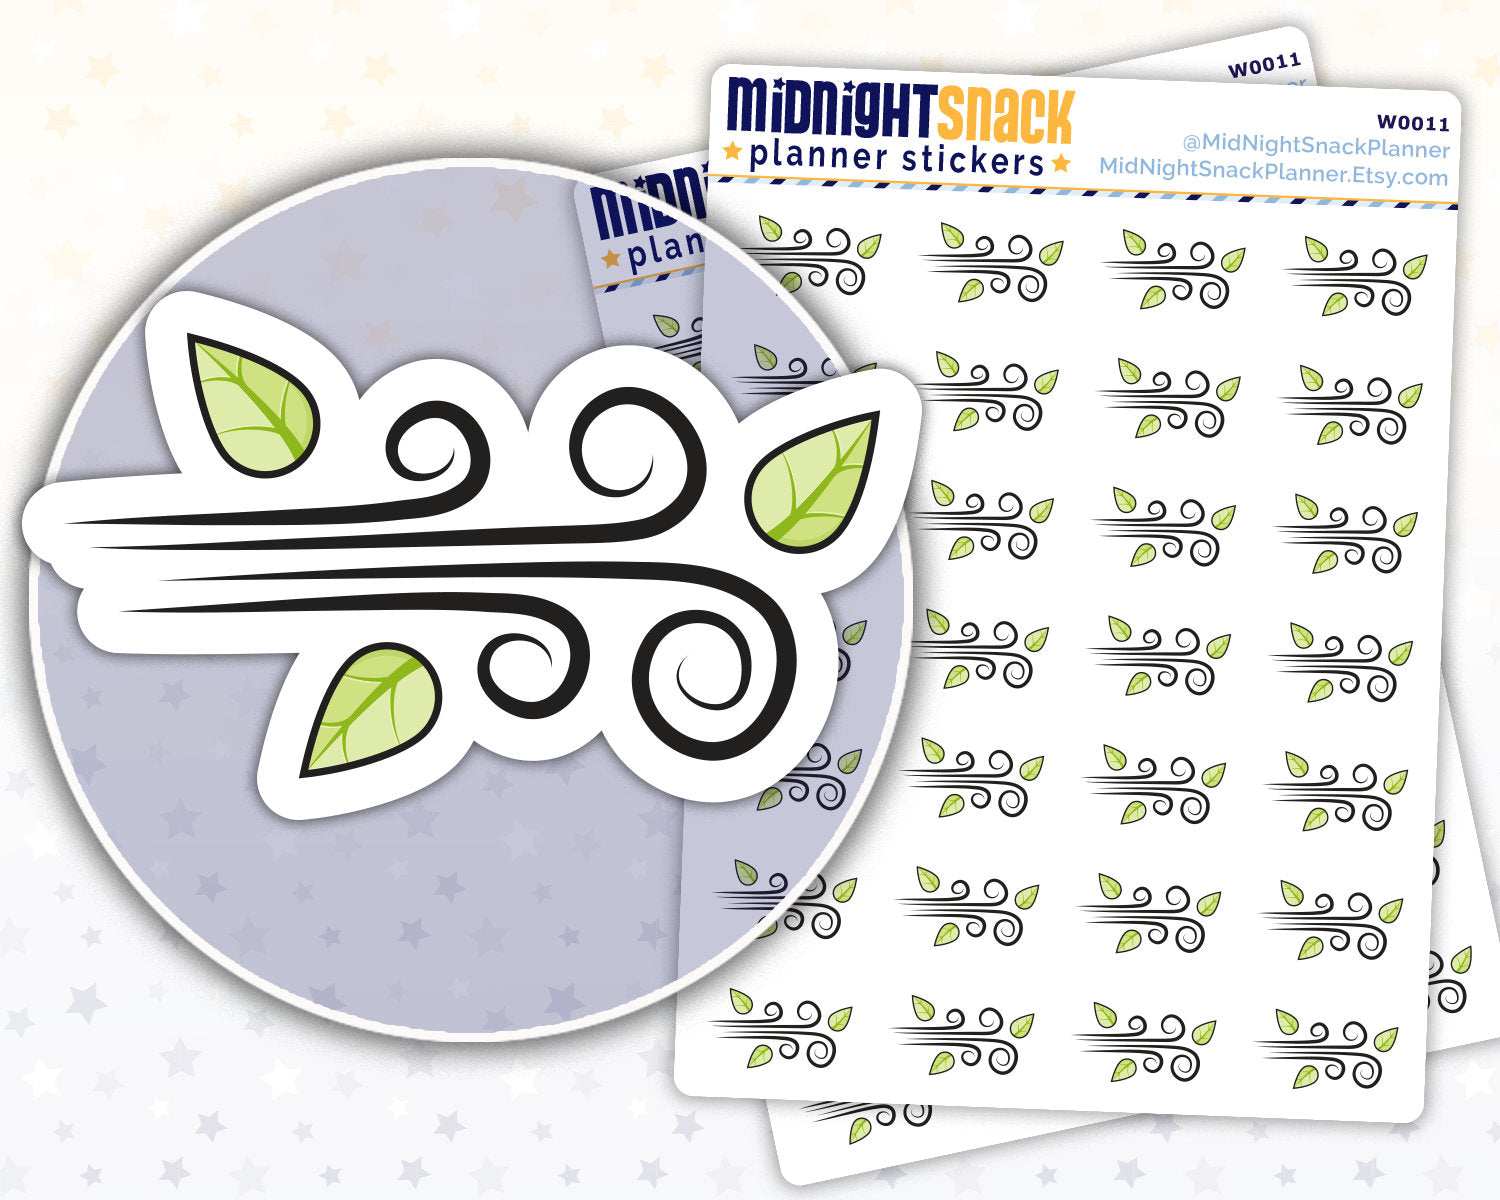 Windy Day Icon: Weather Planner Stickers Midnight Snack Planner